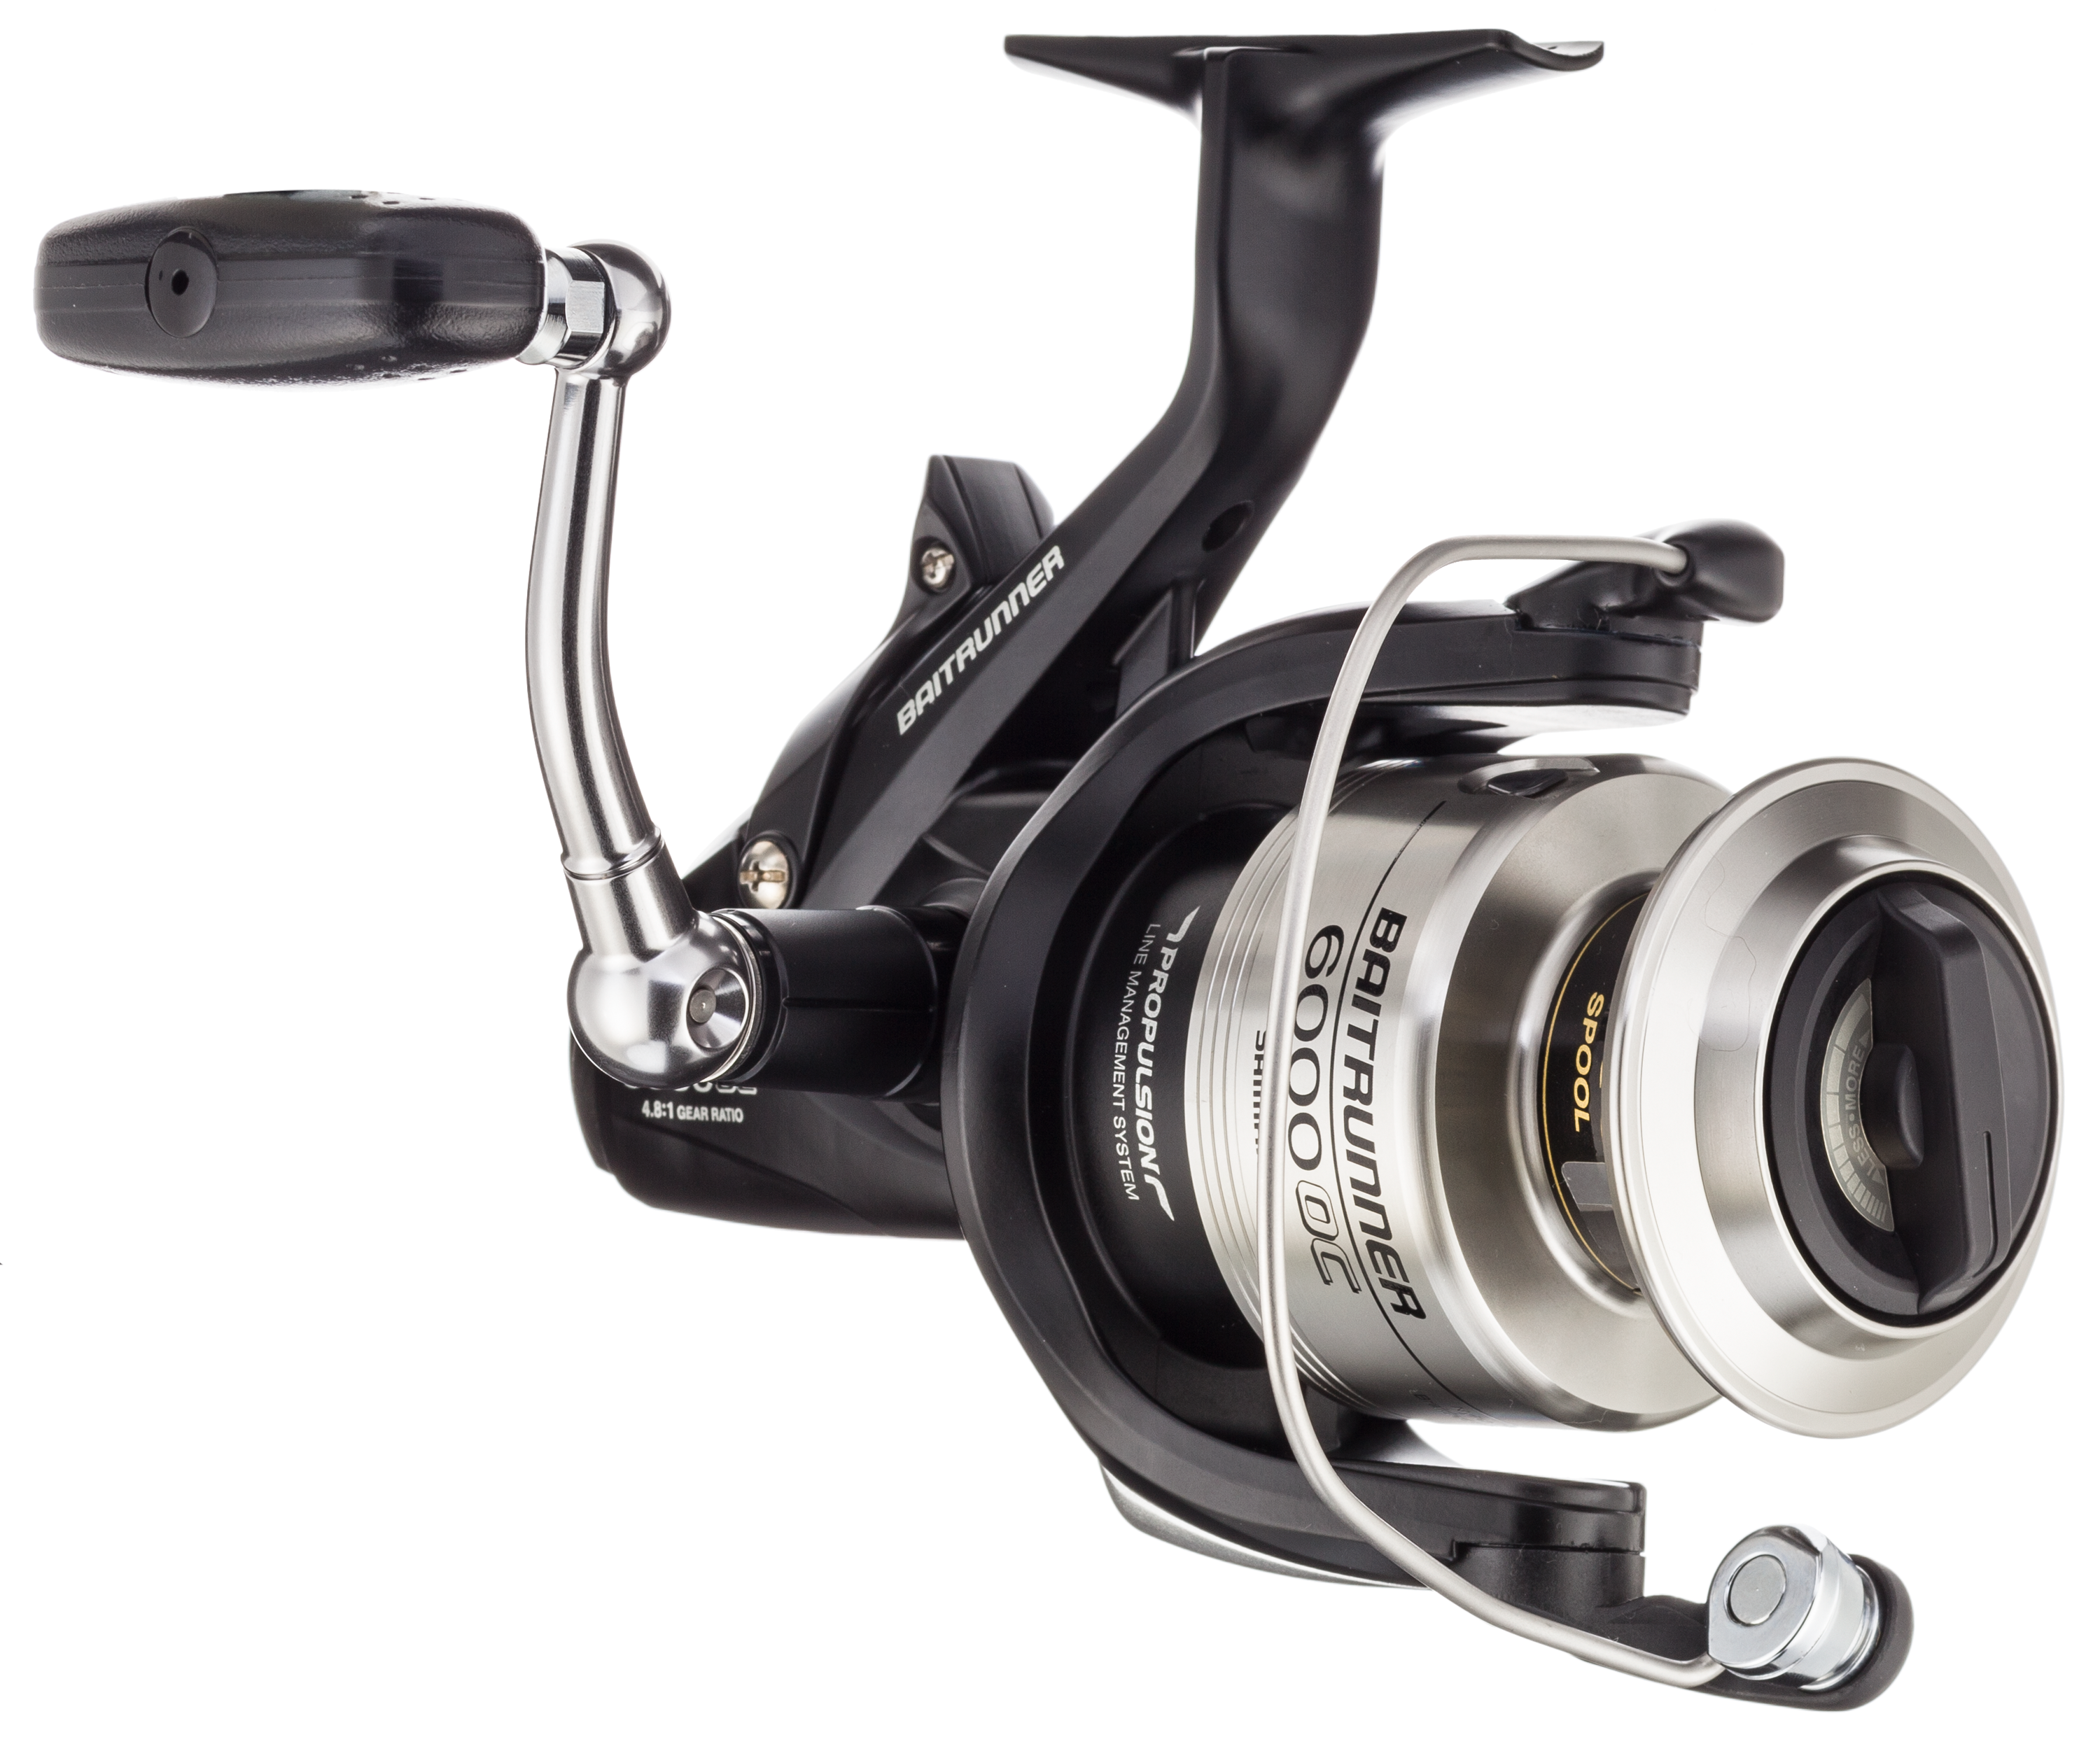 Cheap Shimano Store - We'll track the Spinning Reels Shimano Thunnus Ci4  8000 Spinning Fishing Reel cheap prices for you!